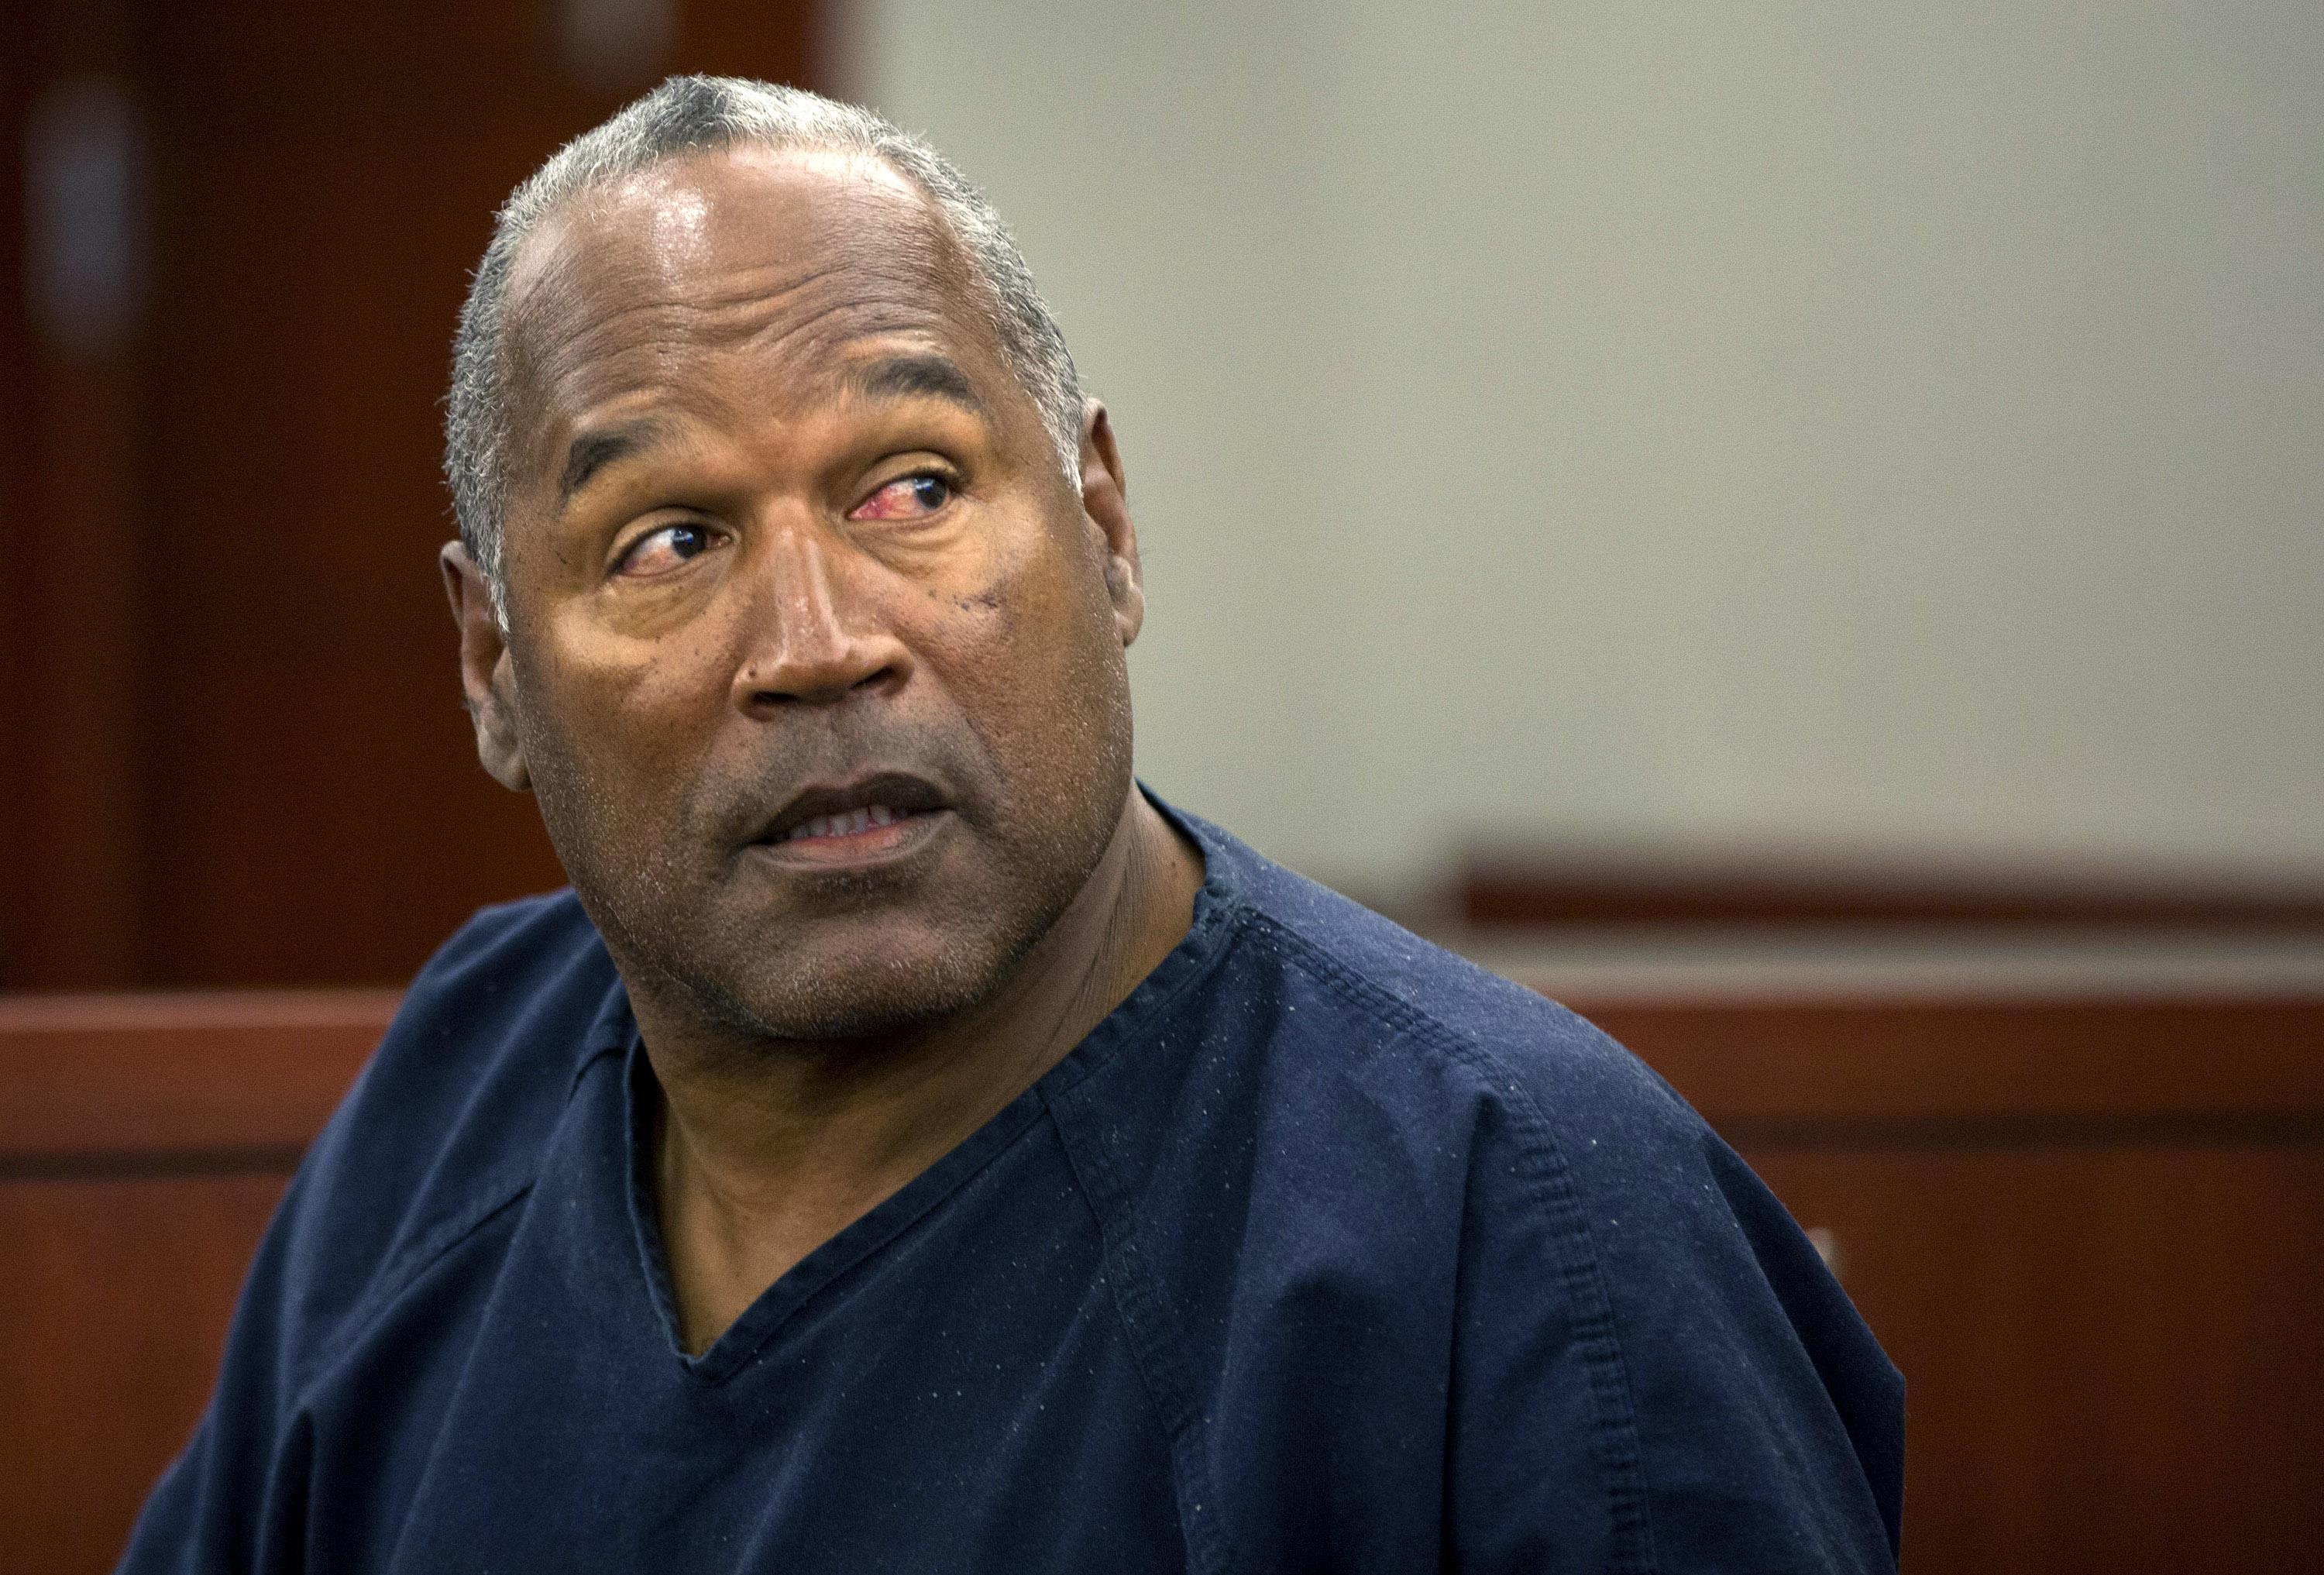 Yale Galanter, O.J. Simpson: Did the Juice get jobbed by his lawyer?